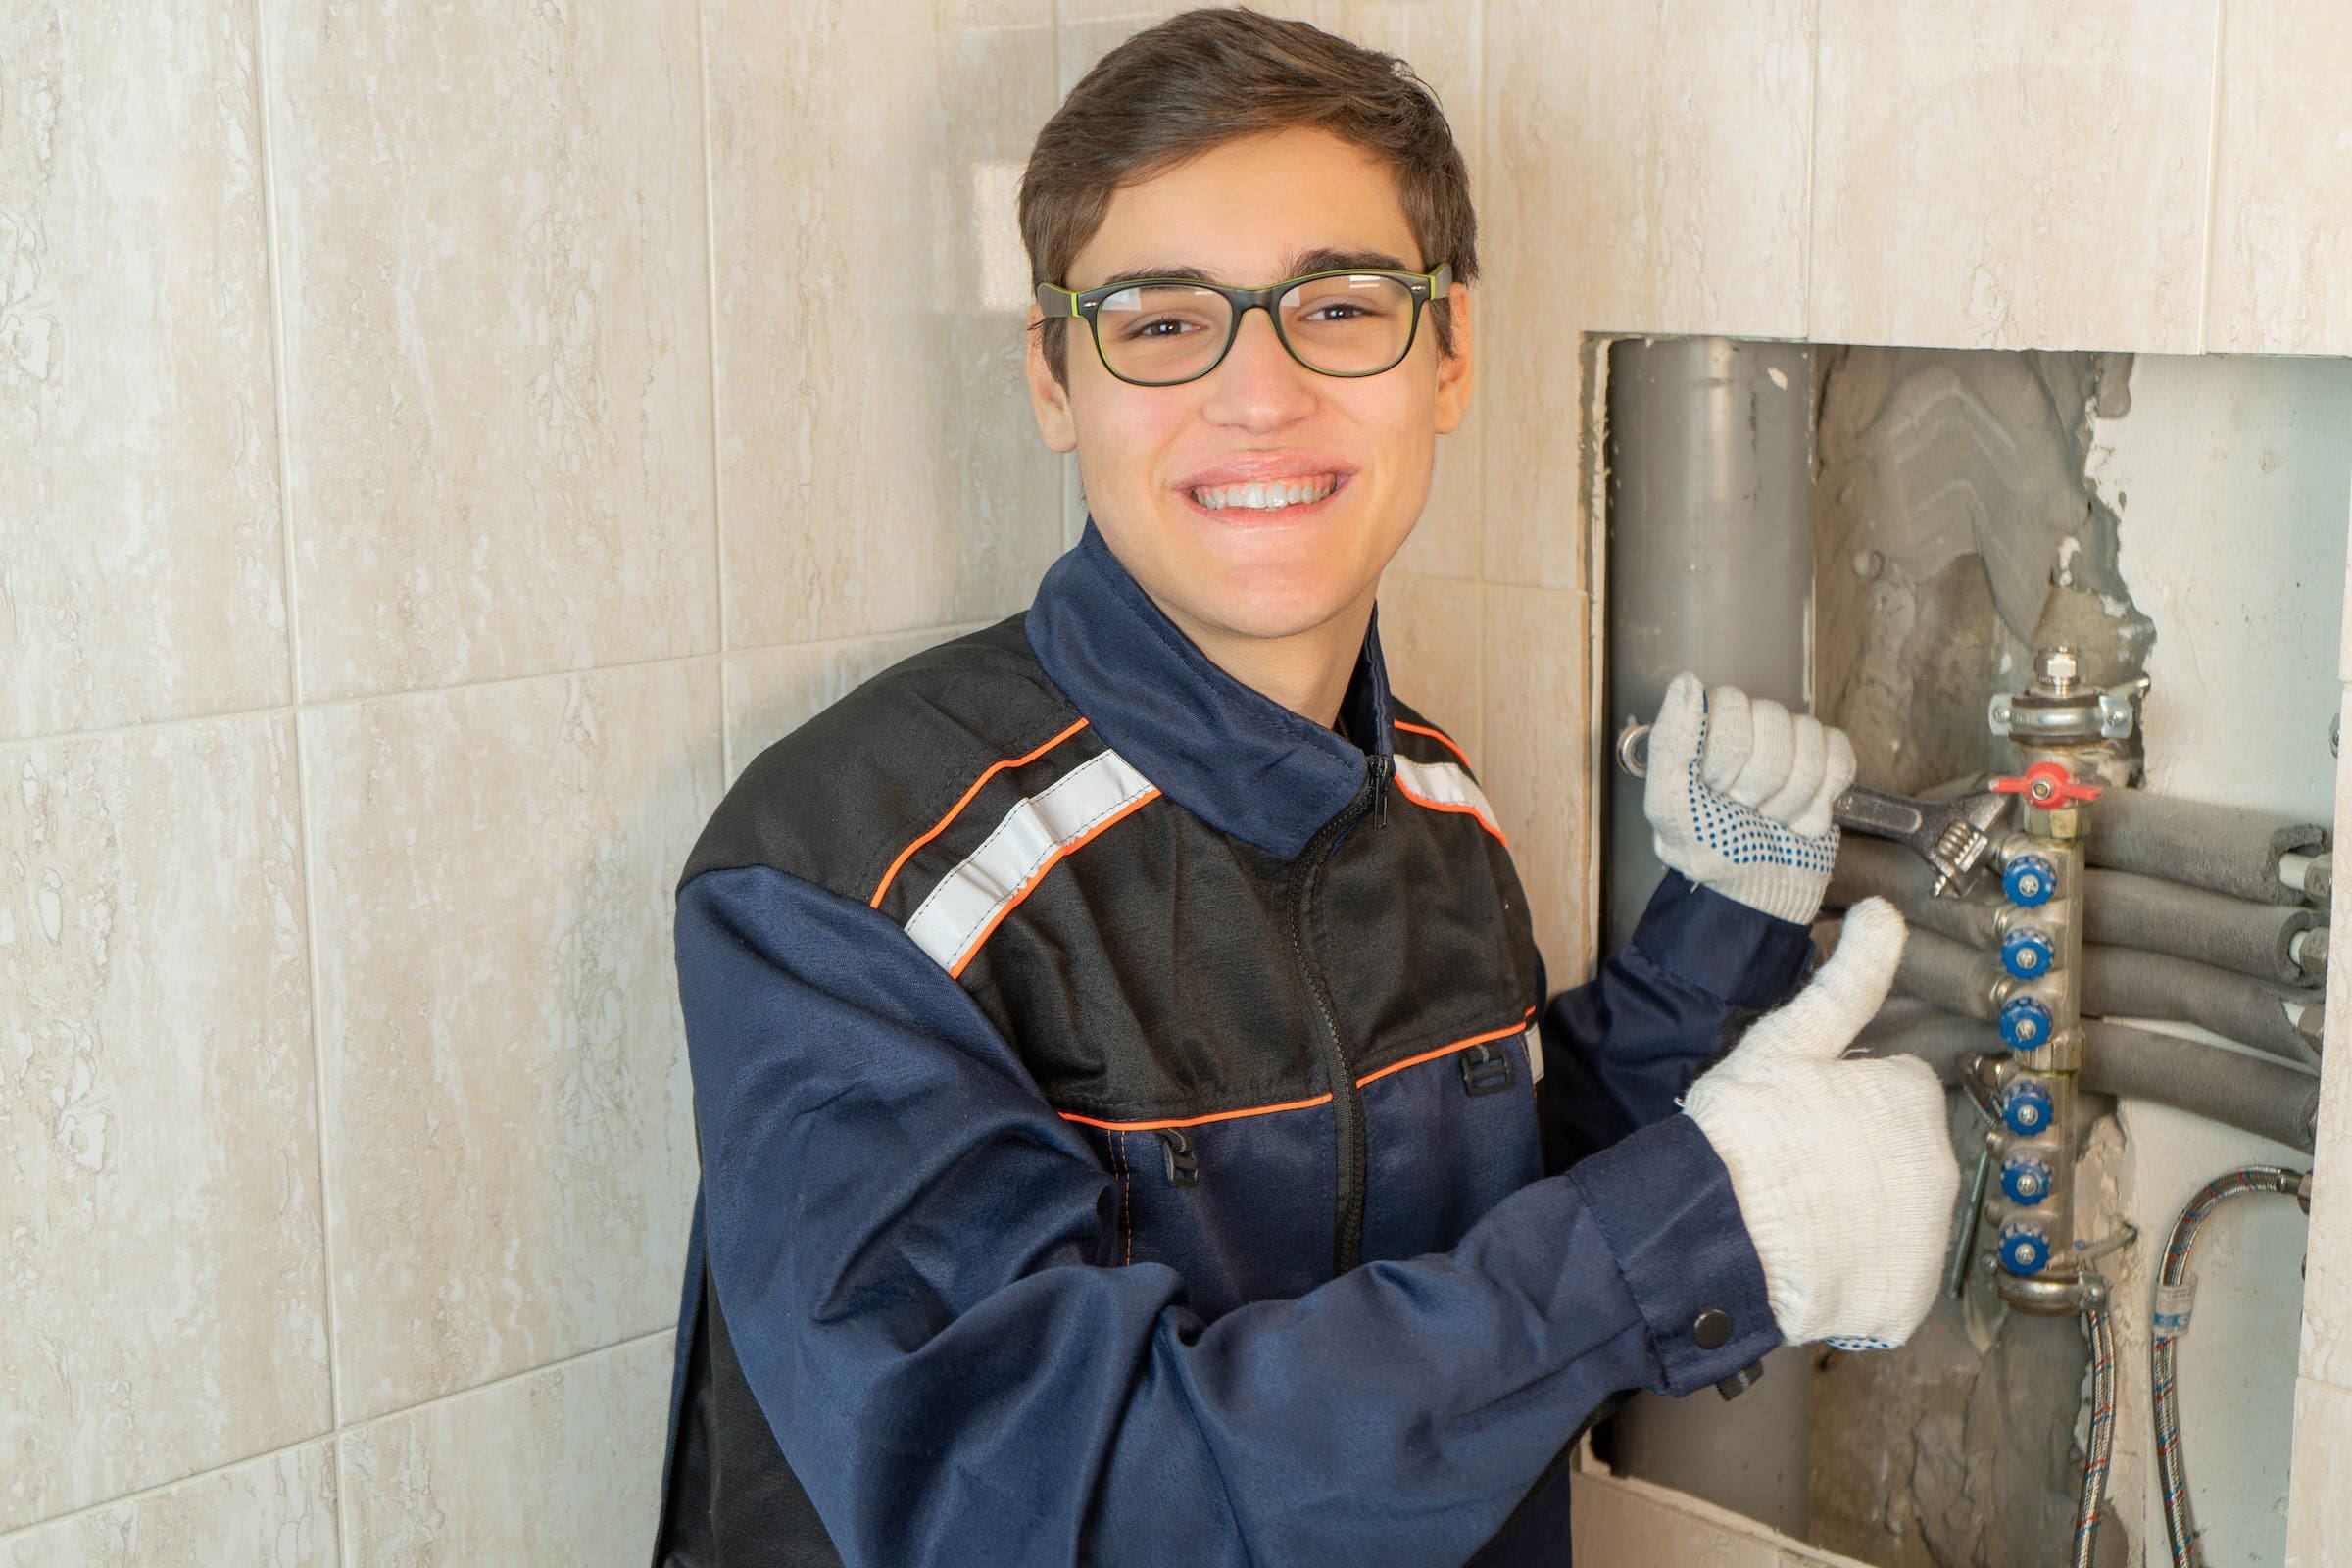 Student works on plumbing in a shower wall